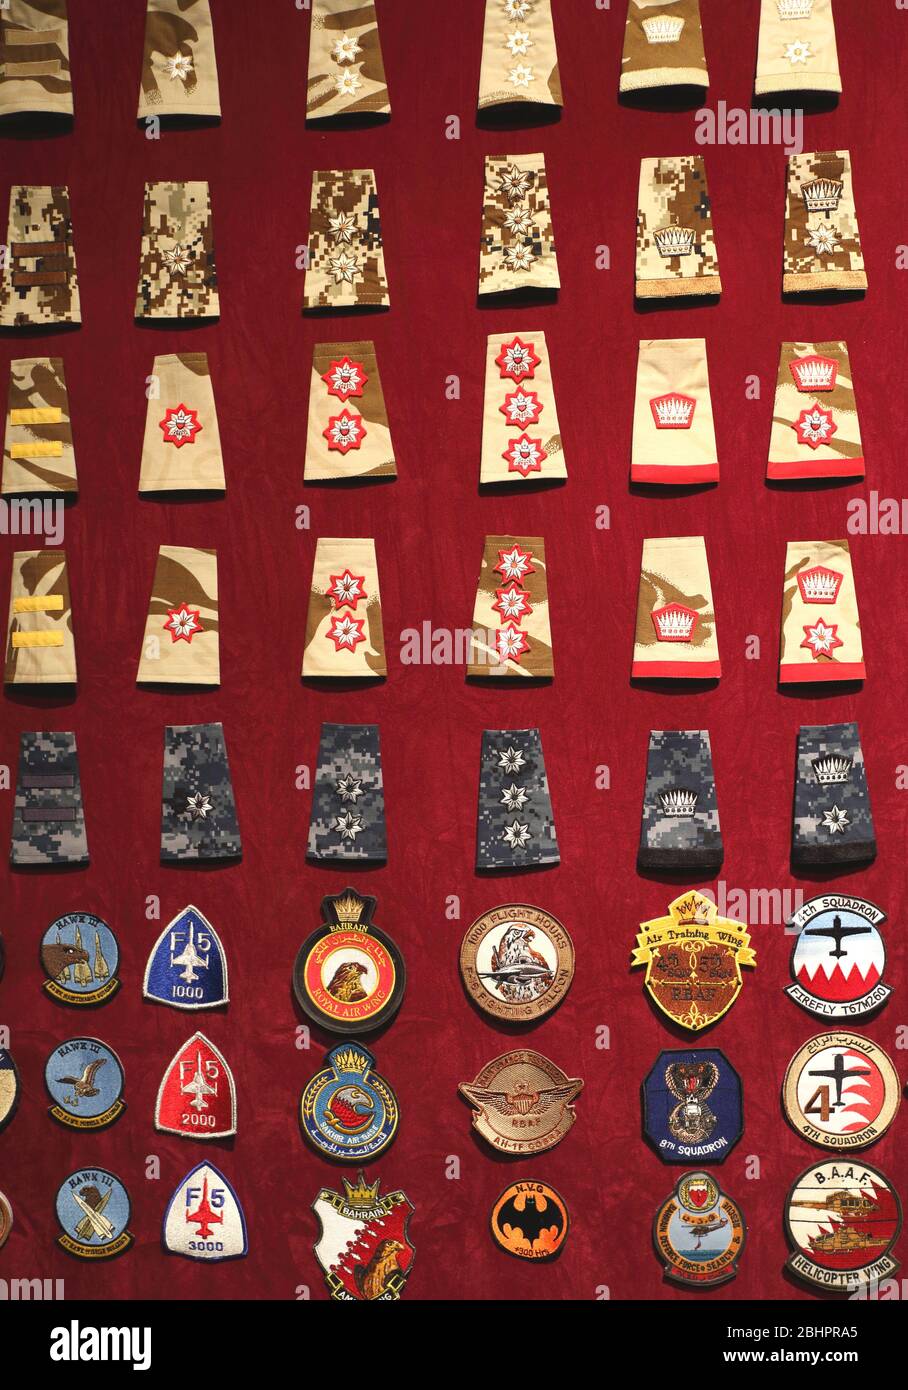 Rank and other military insignia on display at the Military Museum, Riffaa, Kingdom of Bahrain Stock Photo